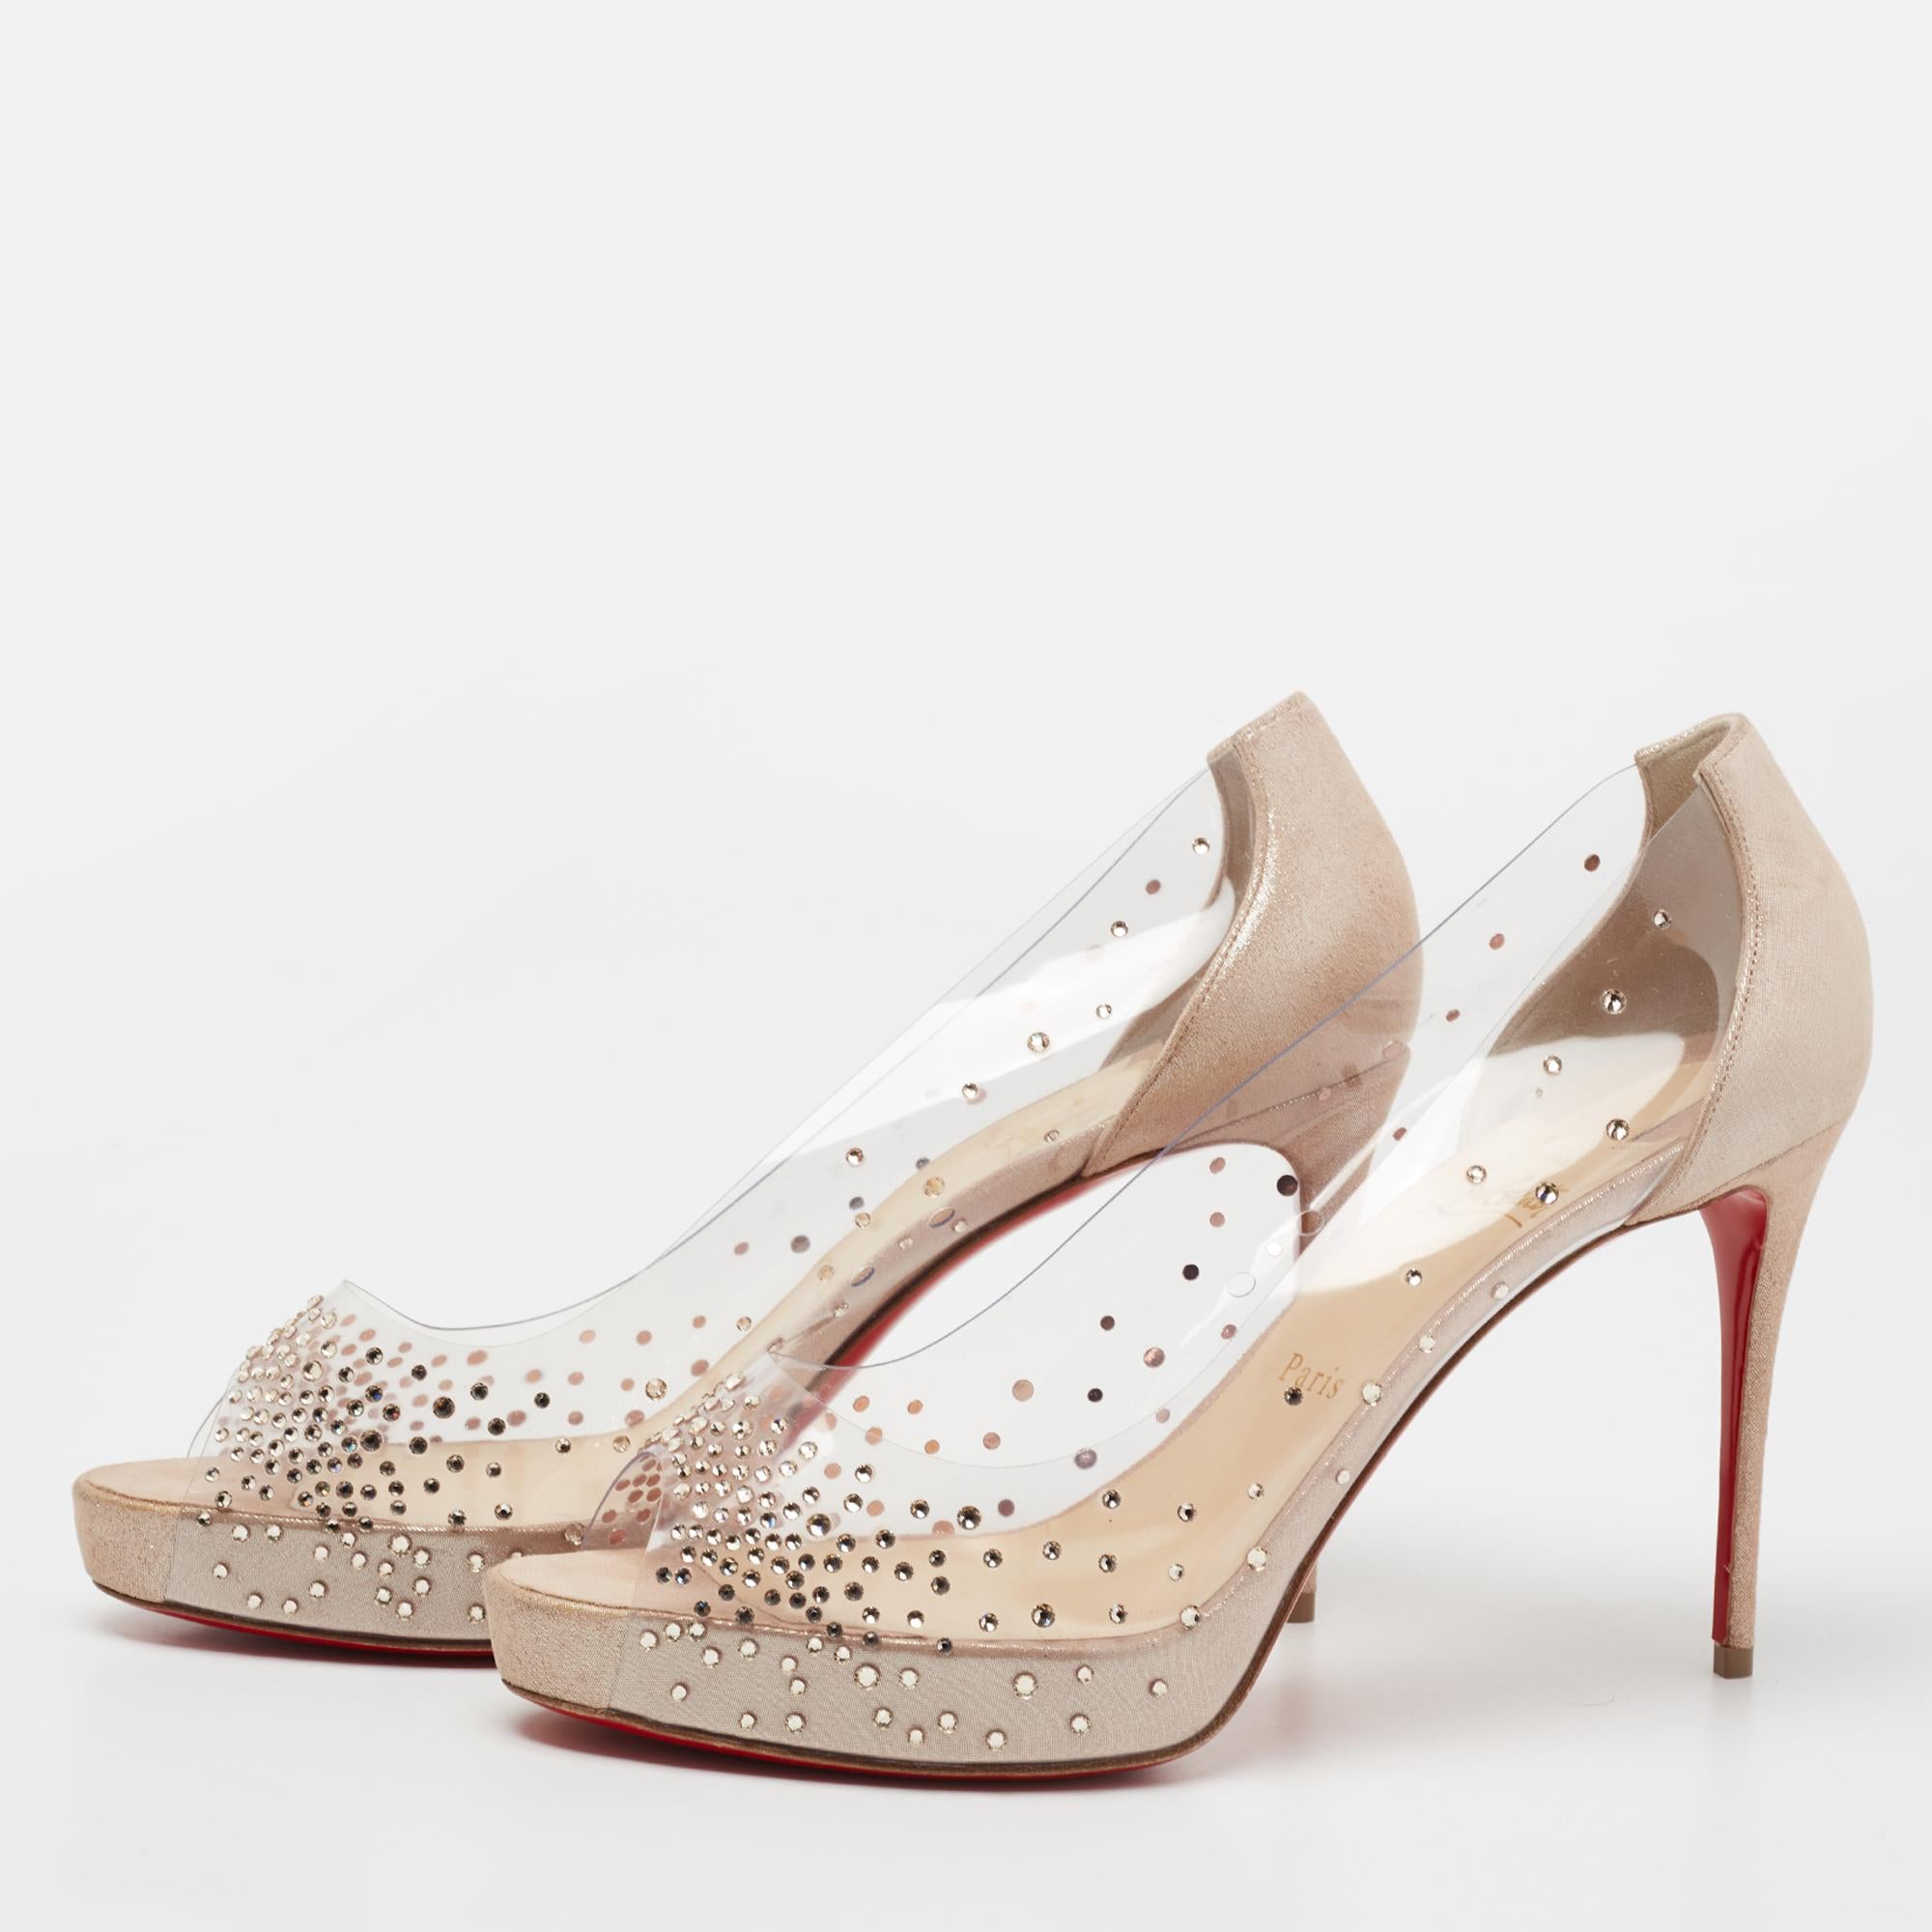 Christian Louboutin Beige Shimmer Suede  PVC Very Strass Peep-Toe Pumps Size 41 1